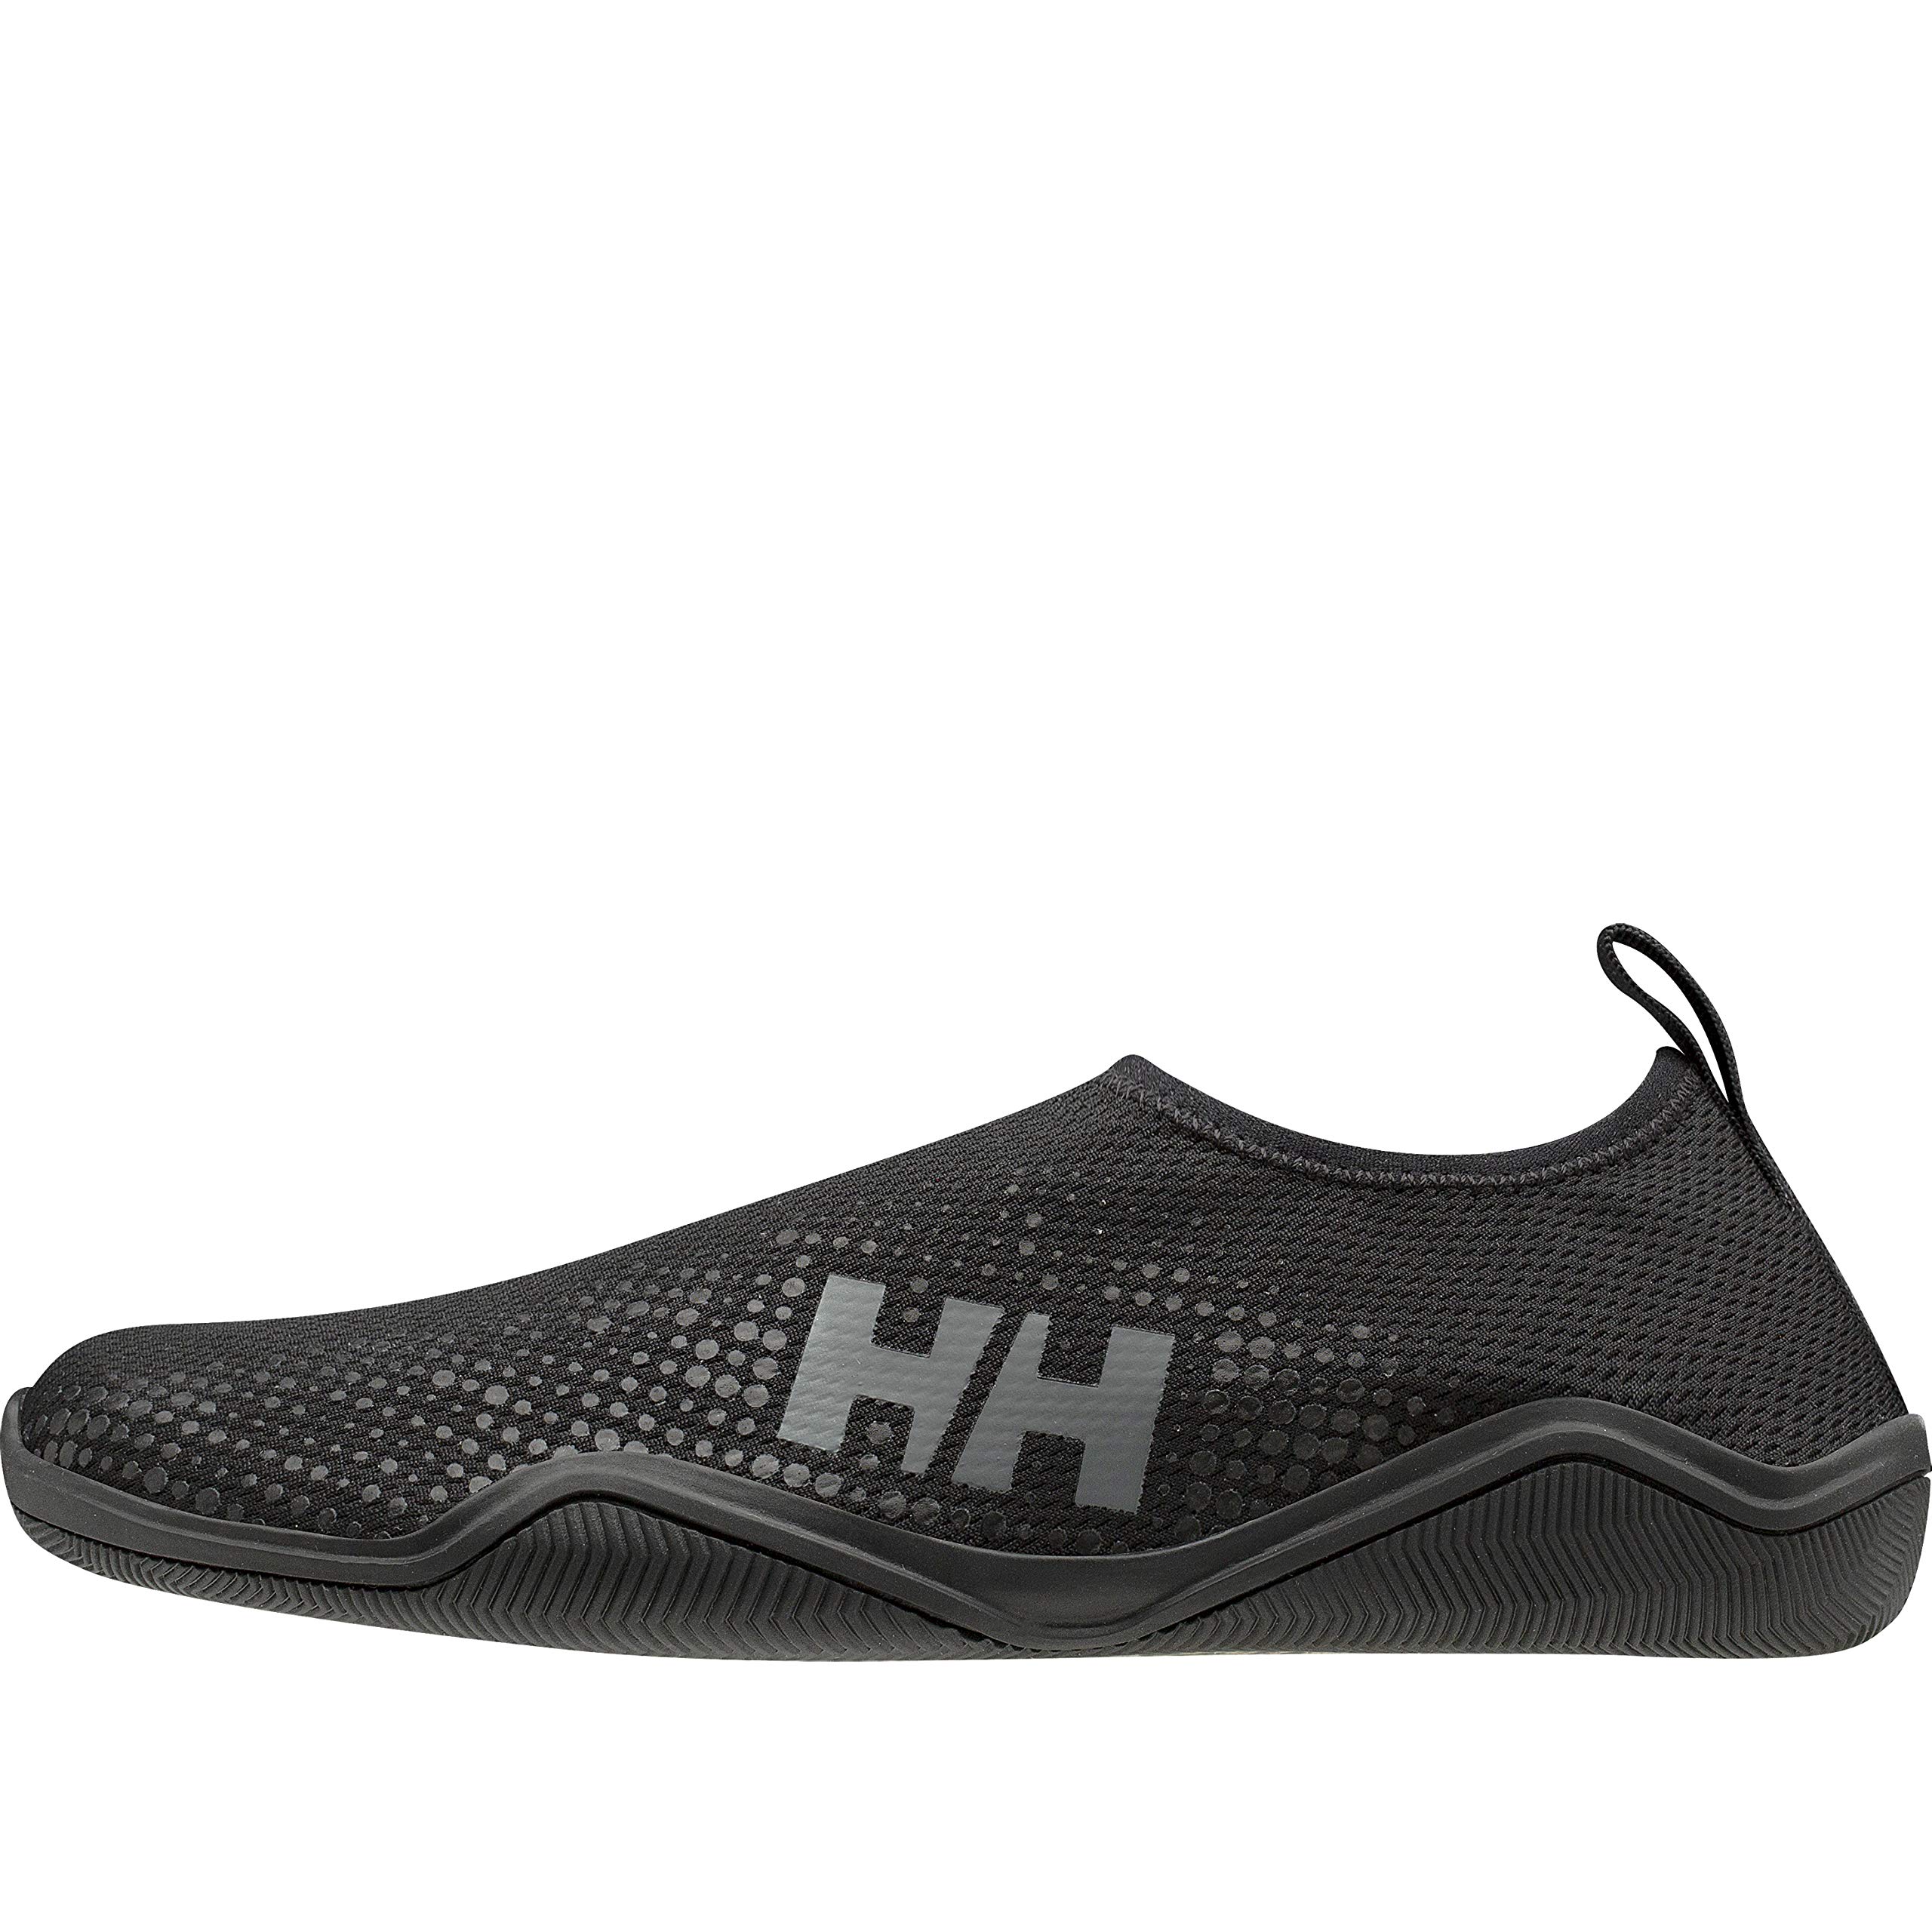 Helly-Hansen Womens Crest Watermoc Sailing Watersports Shoes, Light-Weight, Breathable, 990 Black/Charcoal, 8F